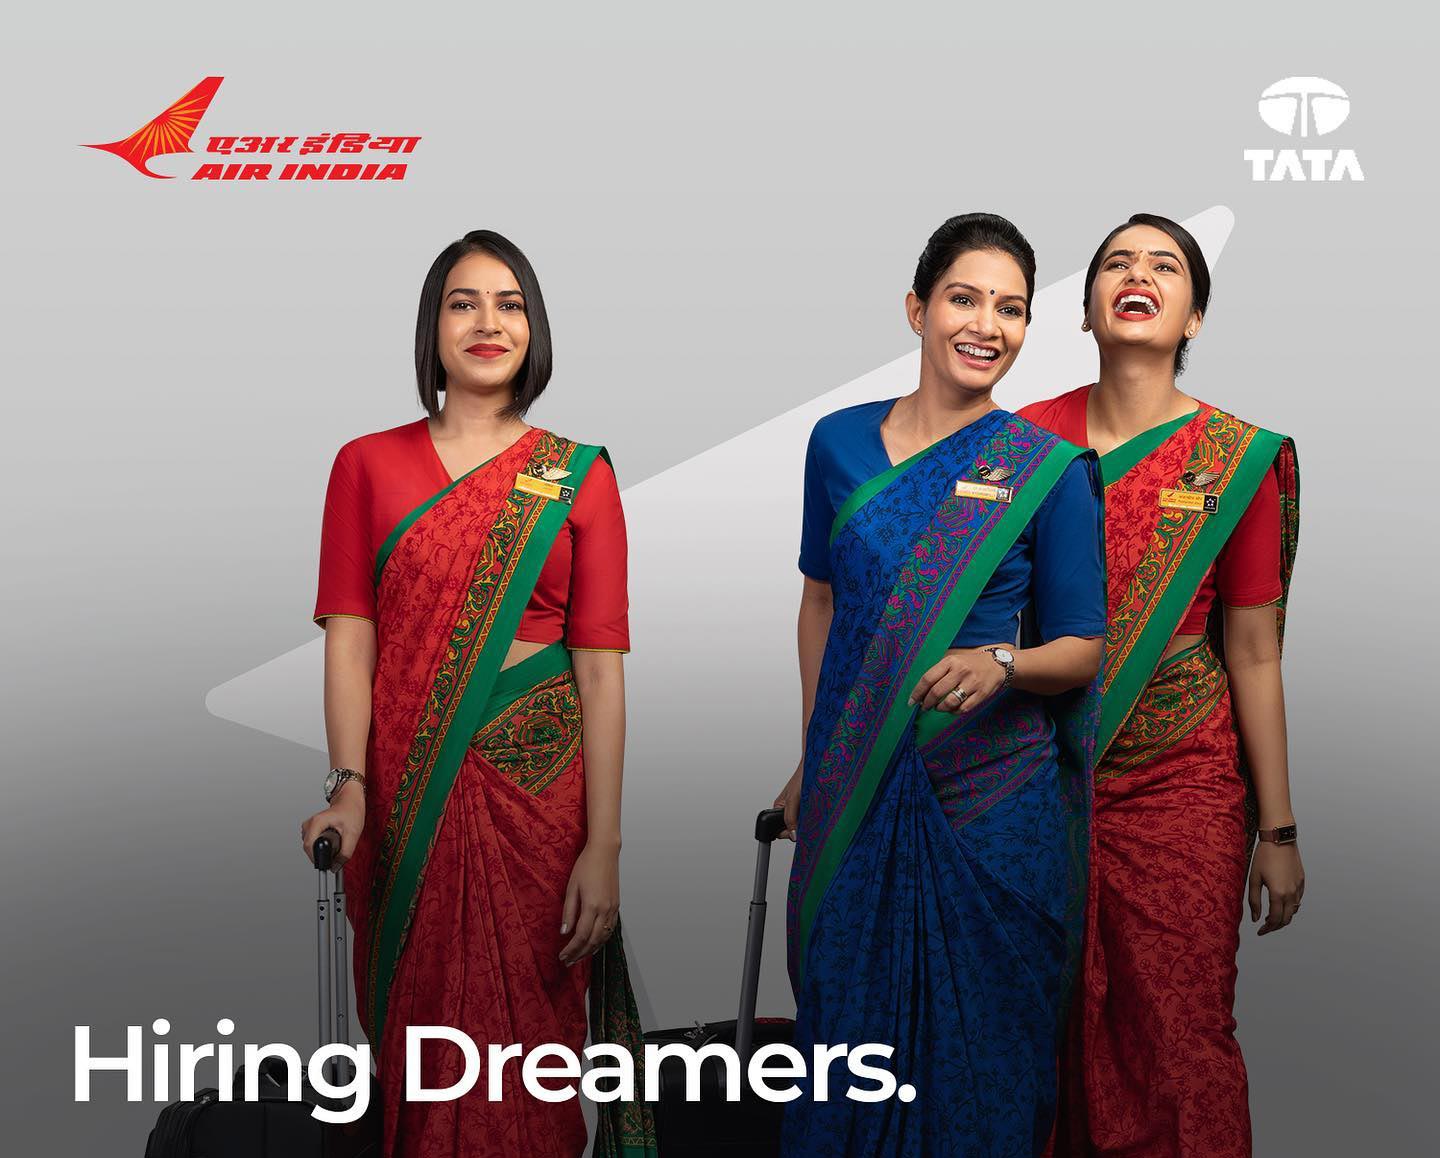 Air India is looking for Cabin Crew